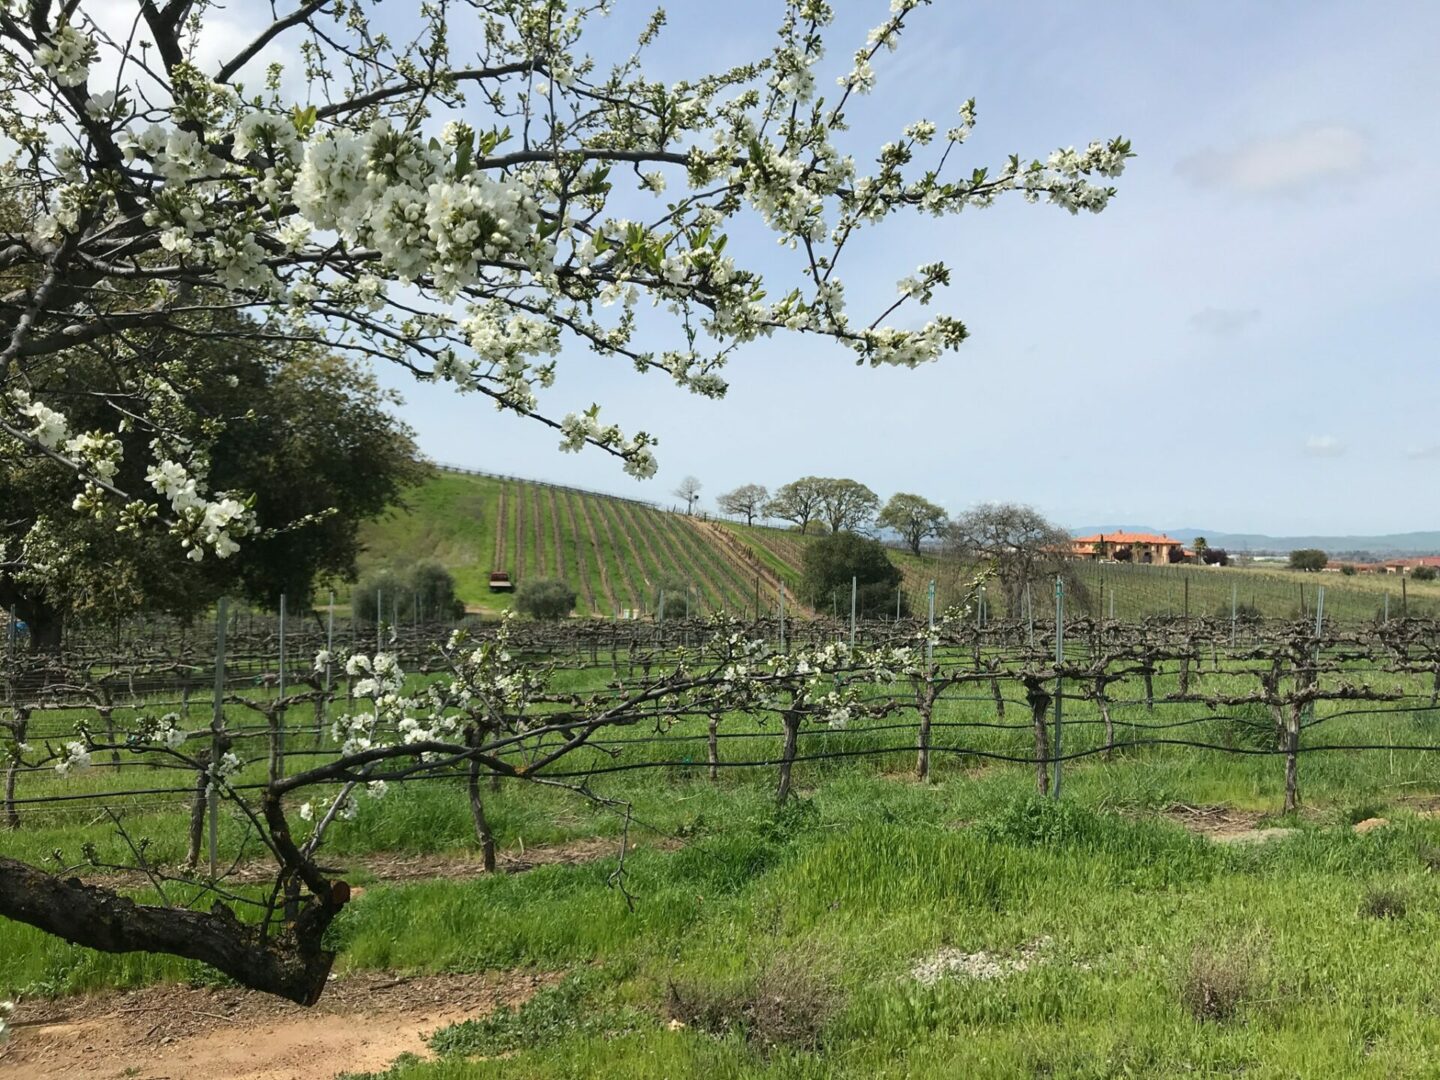 Flowers in bloom in early spring at Bent Creek Winery